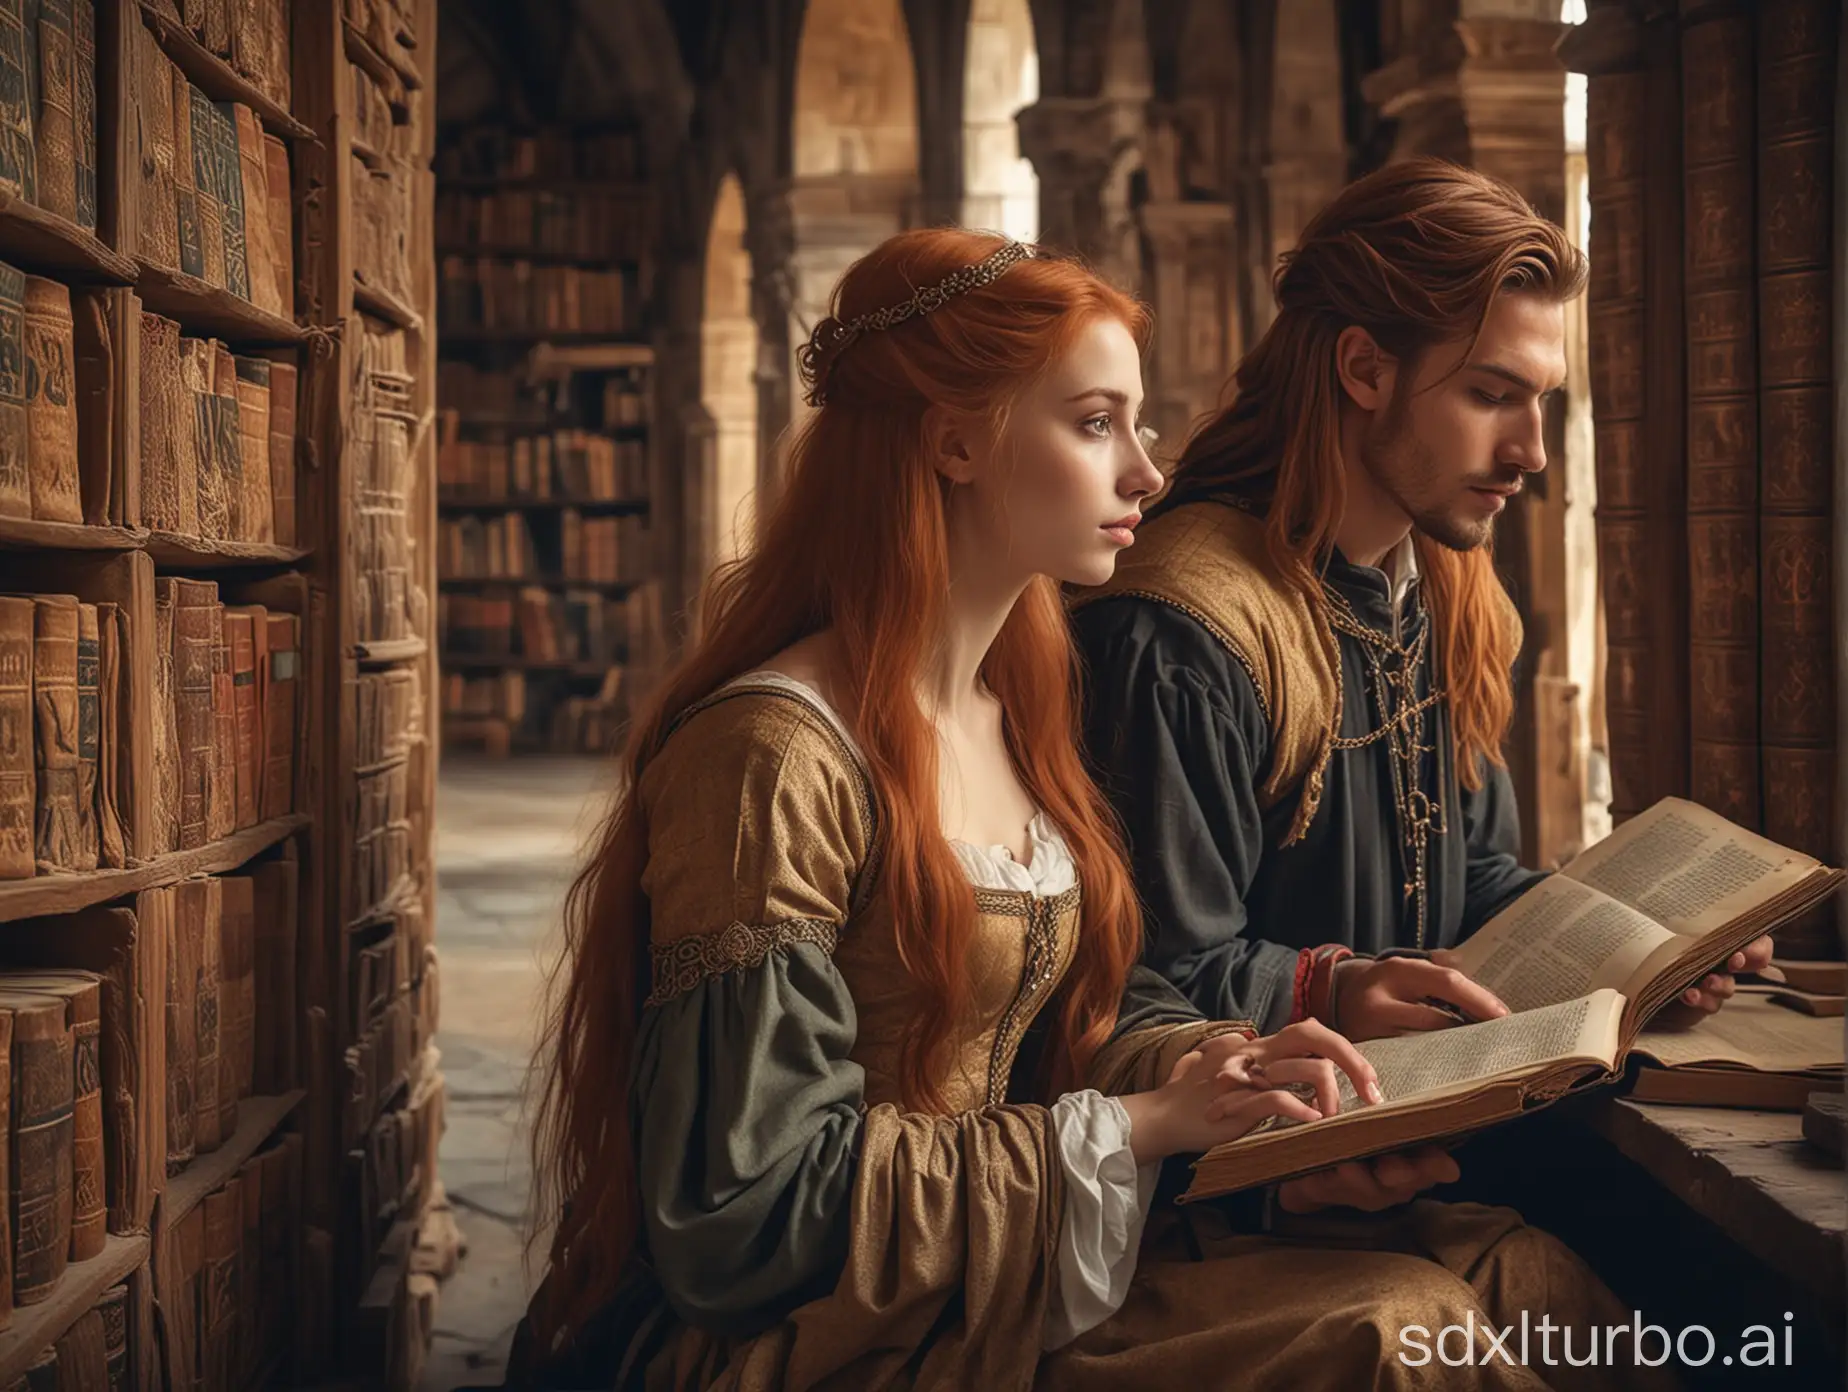 A beautiful girl with long red hair in a ((medieval)) dress and a handsome guy with not long light brown hair in ((medieval)) nice clothes, sit, engrossed in reading an old ancient folio, in an ancient library amidst many ancient books